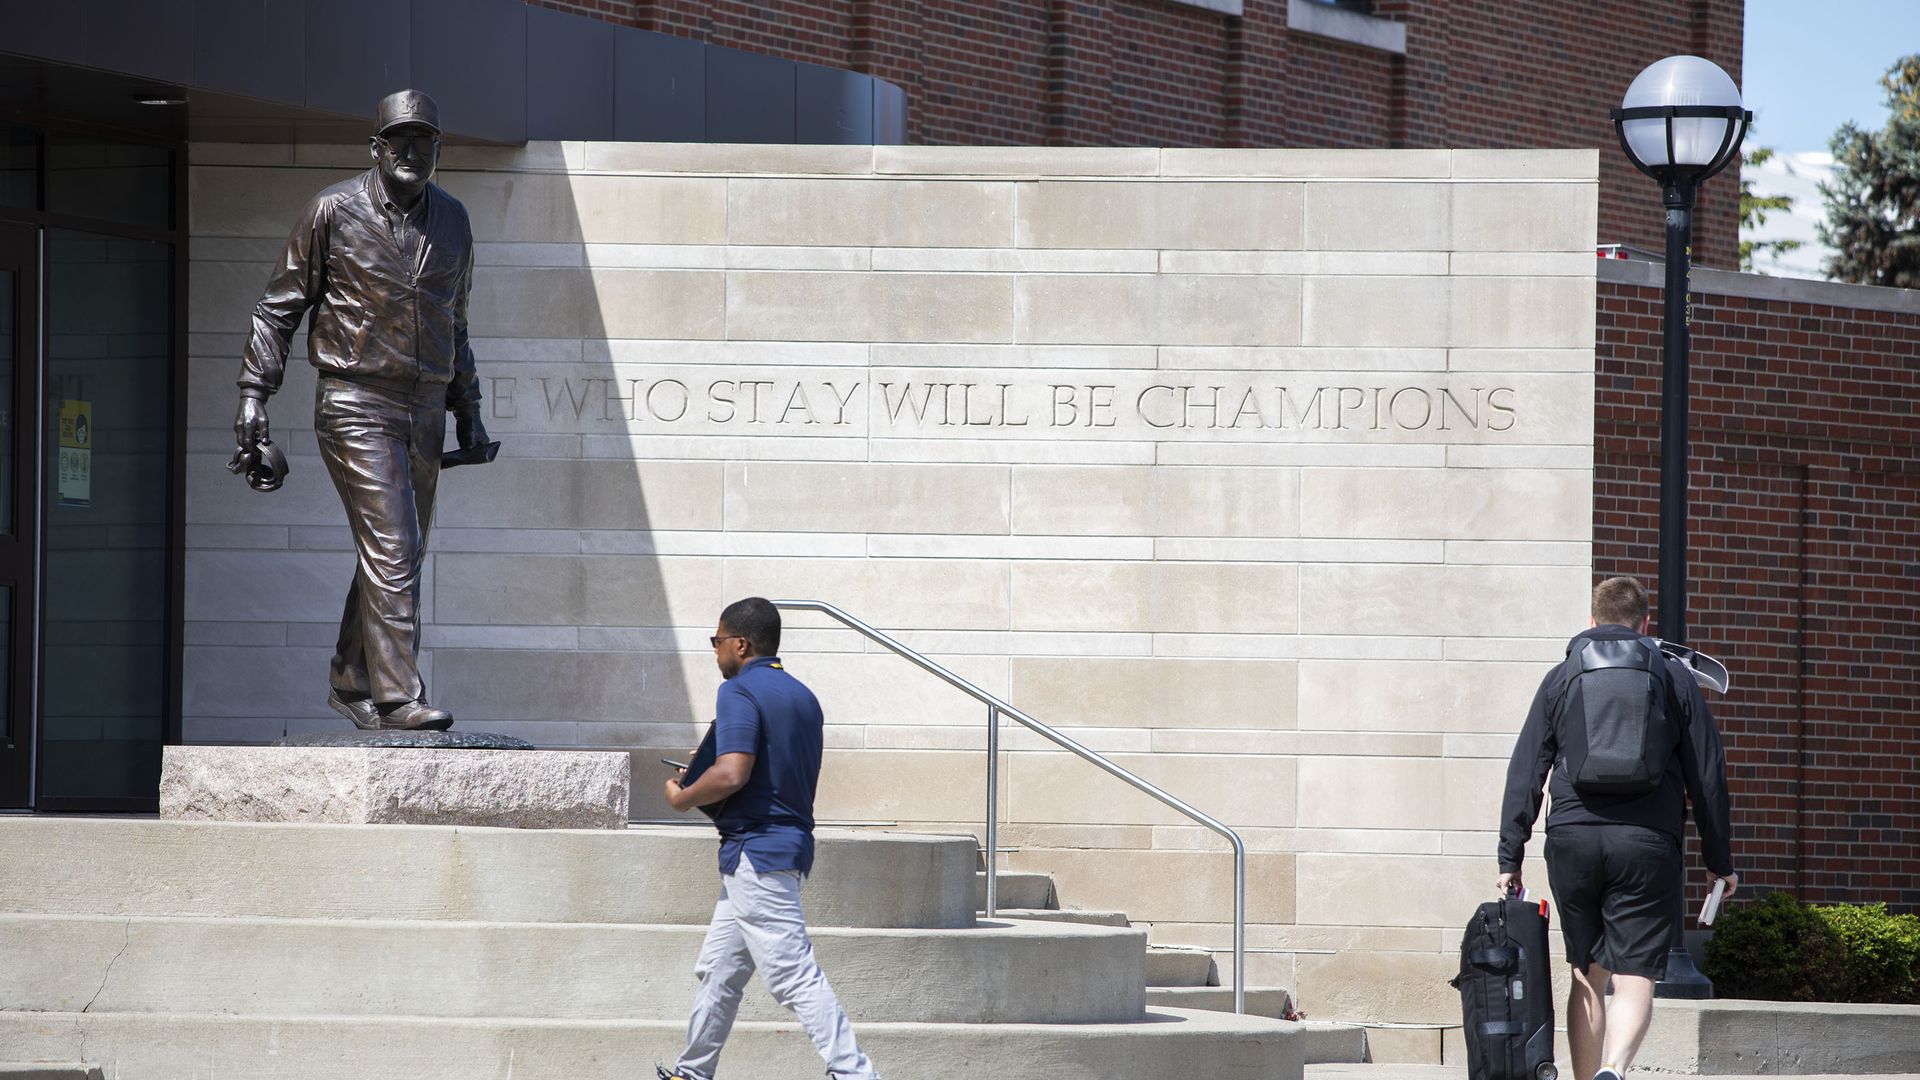 A statue of former University of Michigan football coach Bo Schembechler stands outside of Schembechler Hall on the UM campus .